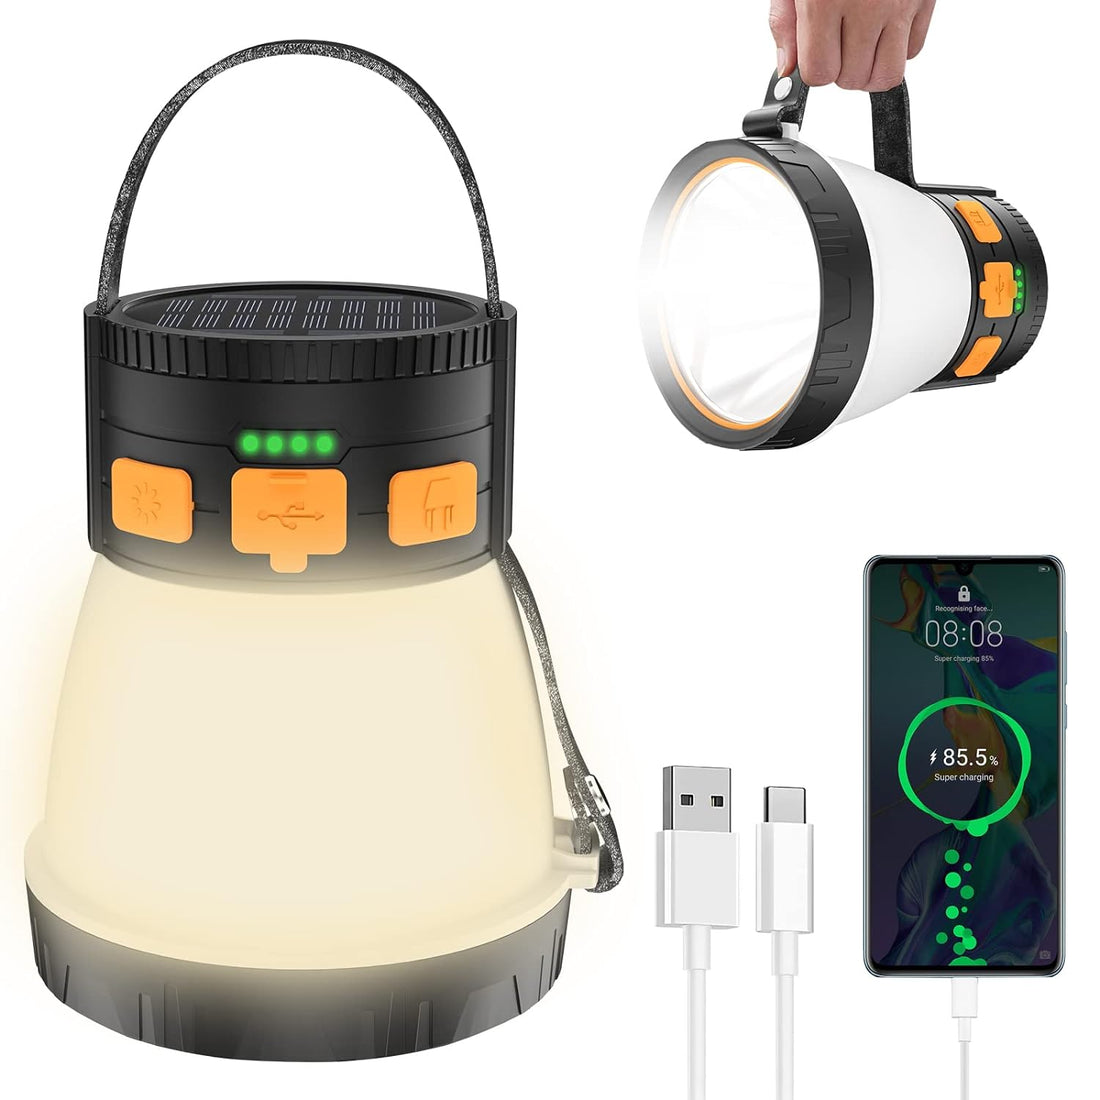 LED Camping Lantern, 1500 Lumens Rechargeable Super Bright Camping Light with Solar Panel Charging, Waterproof, 3 Light Modes, 7500mAh Power Bank, Tent Lantern for Hurricane Emergency, Hiking, Outdoor